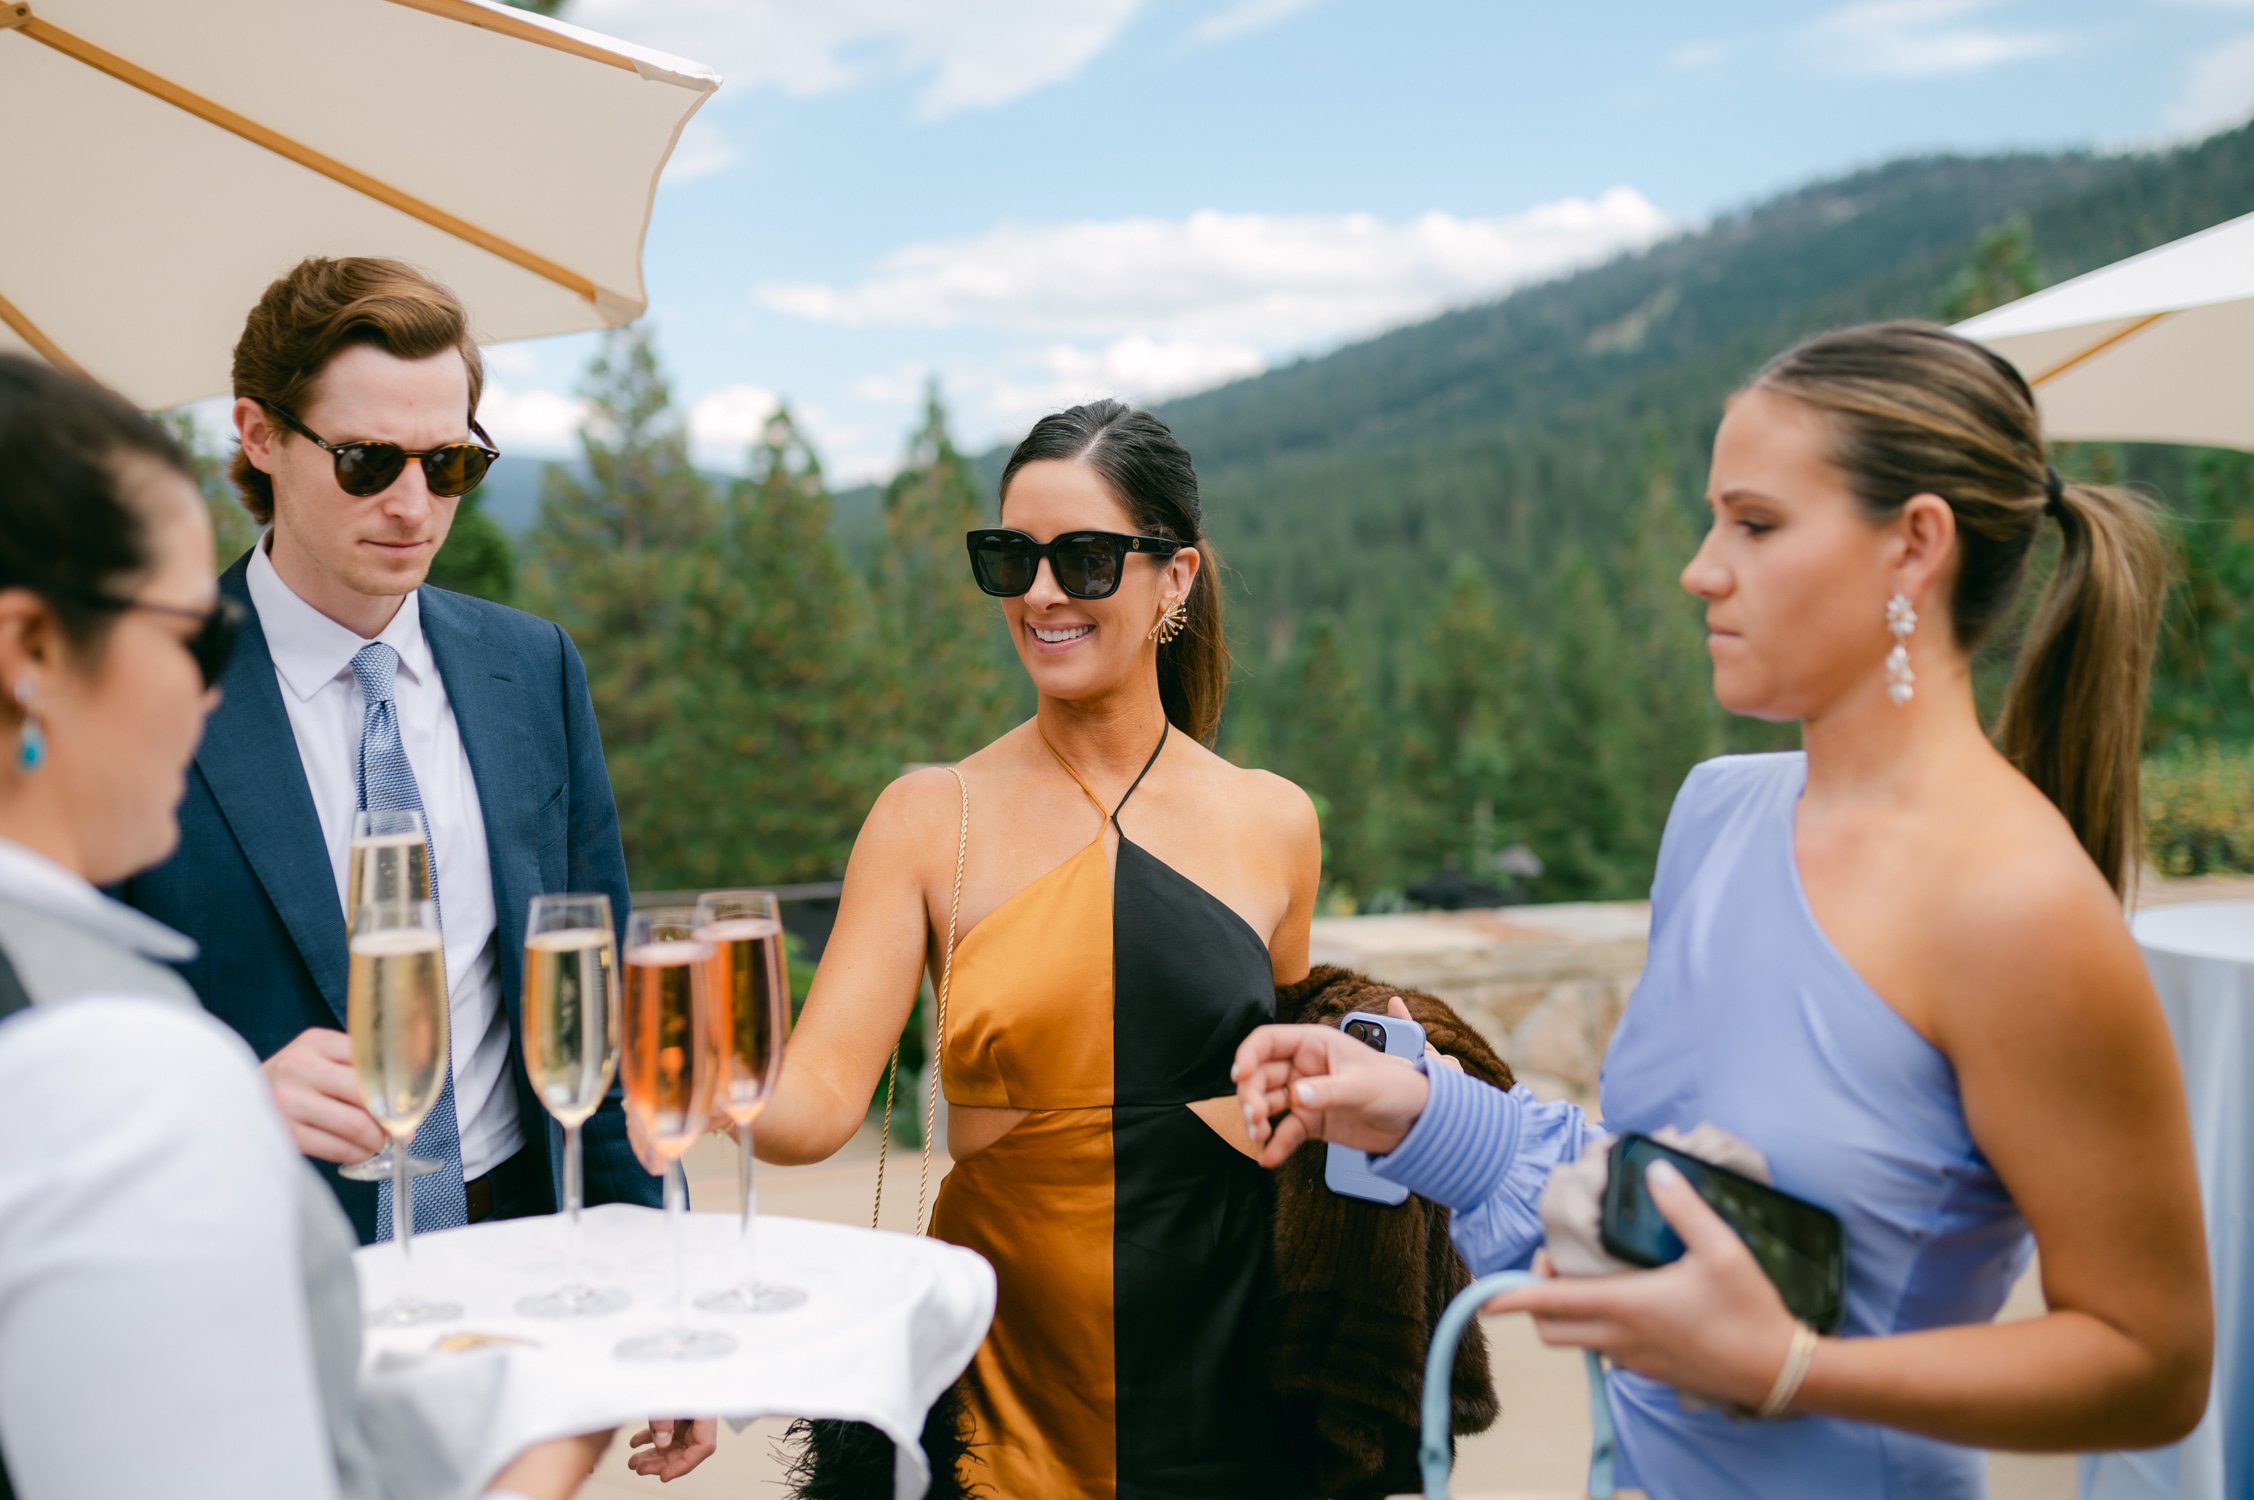 Martis Camp Wedding, photo of the wedding guests enjoying the welcome drinks